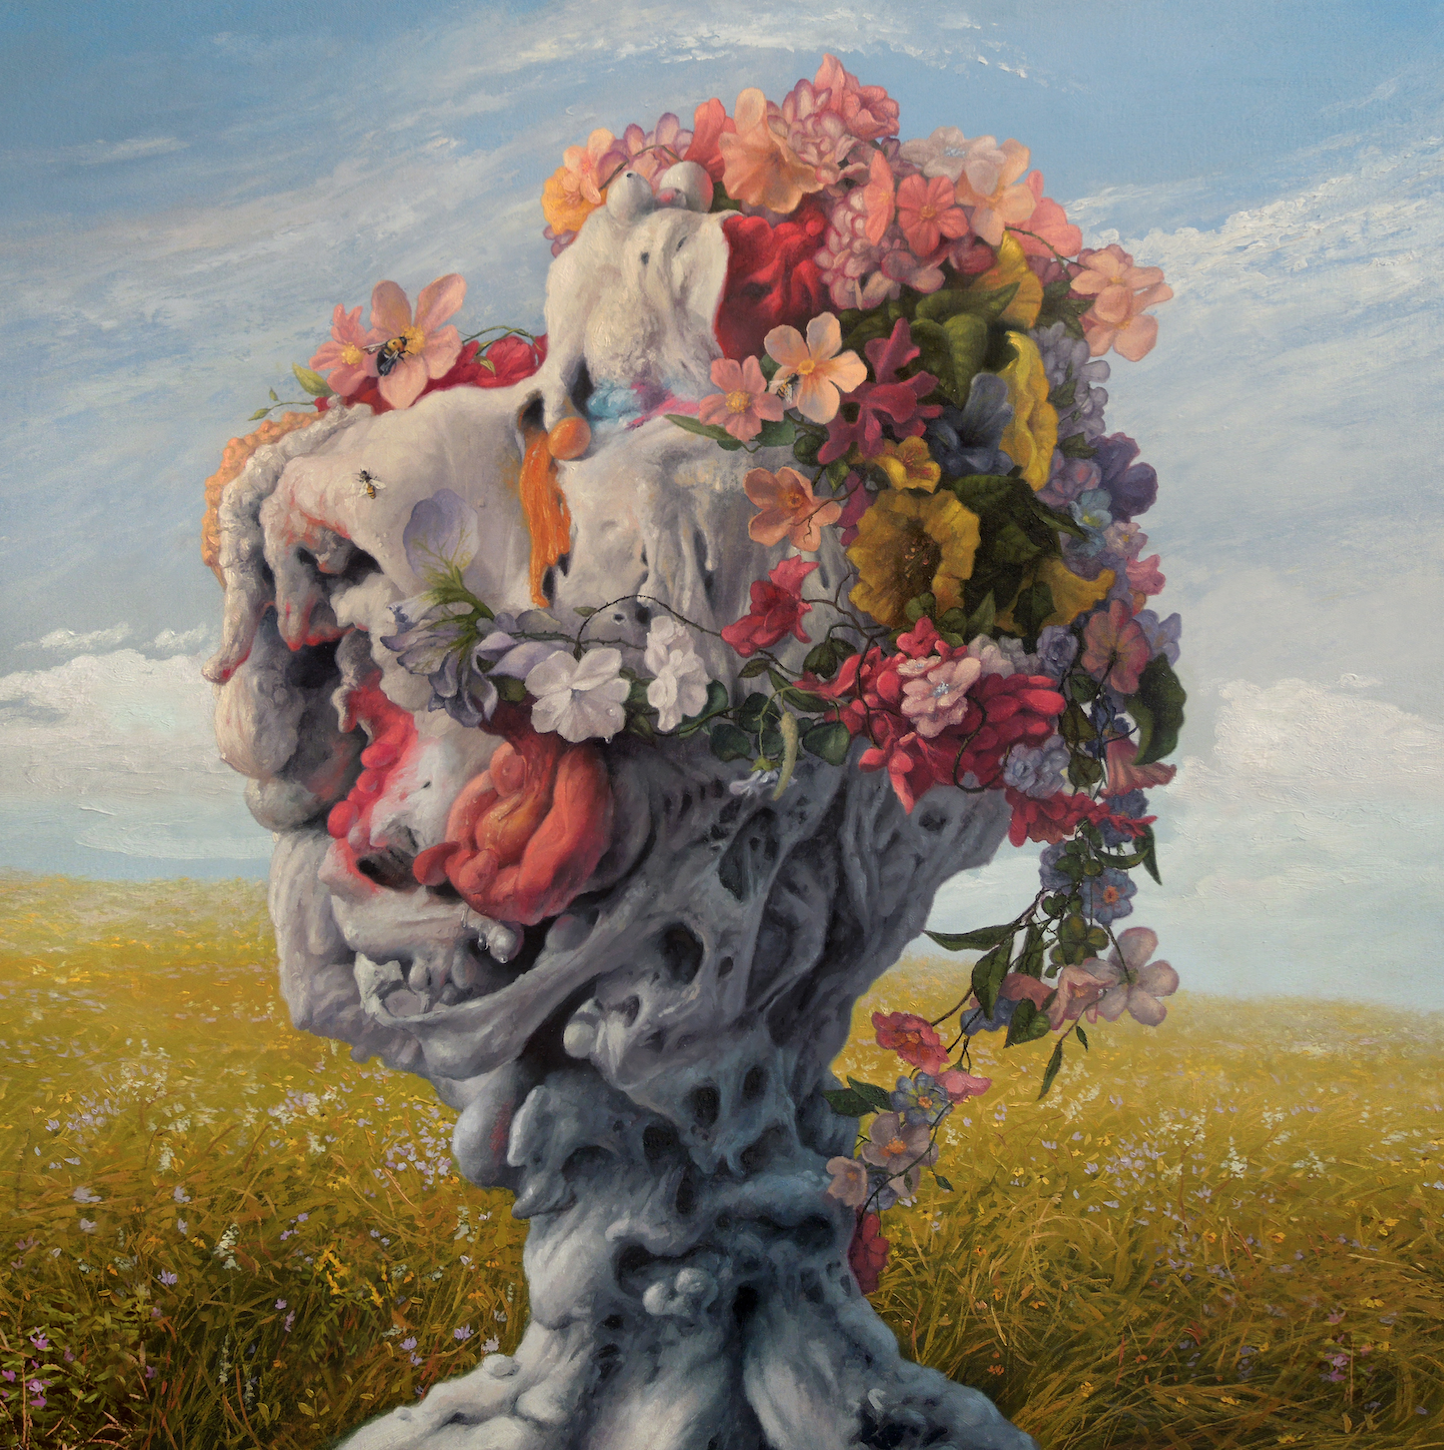 The album cover of Wilderun's - Veil of Imagination - a slightly surrealist, twisted tree covered in flowers